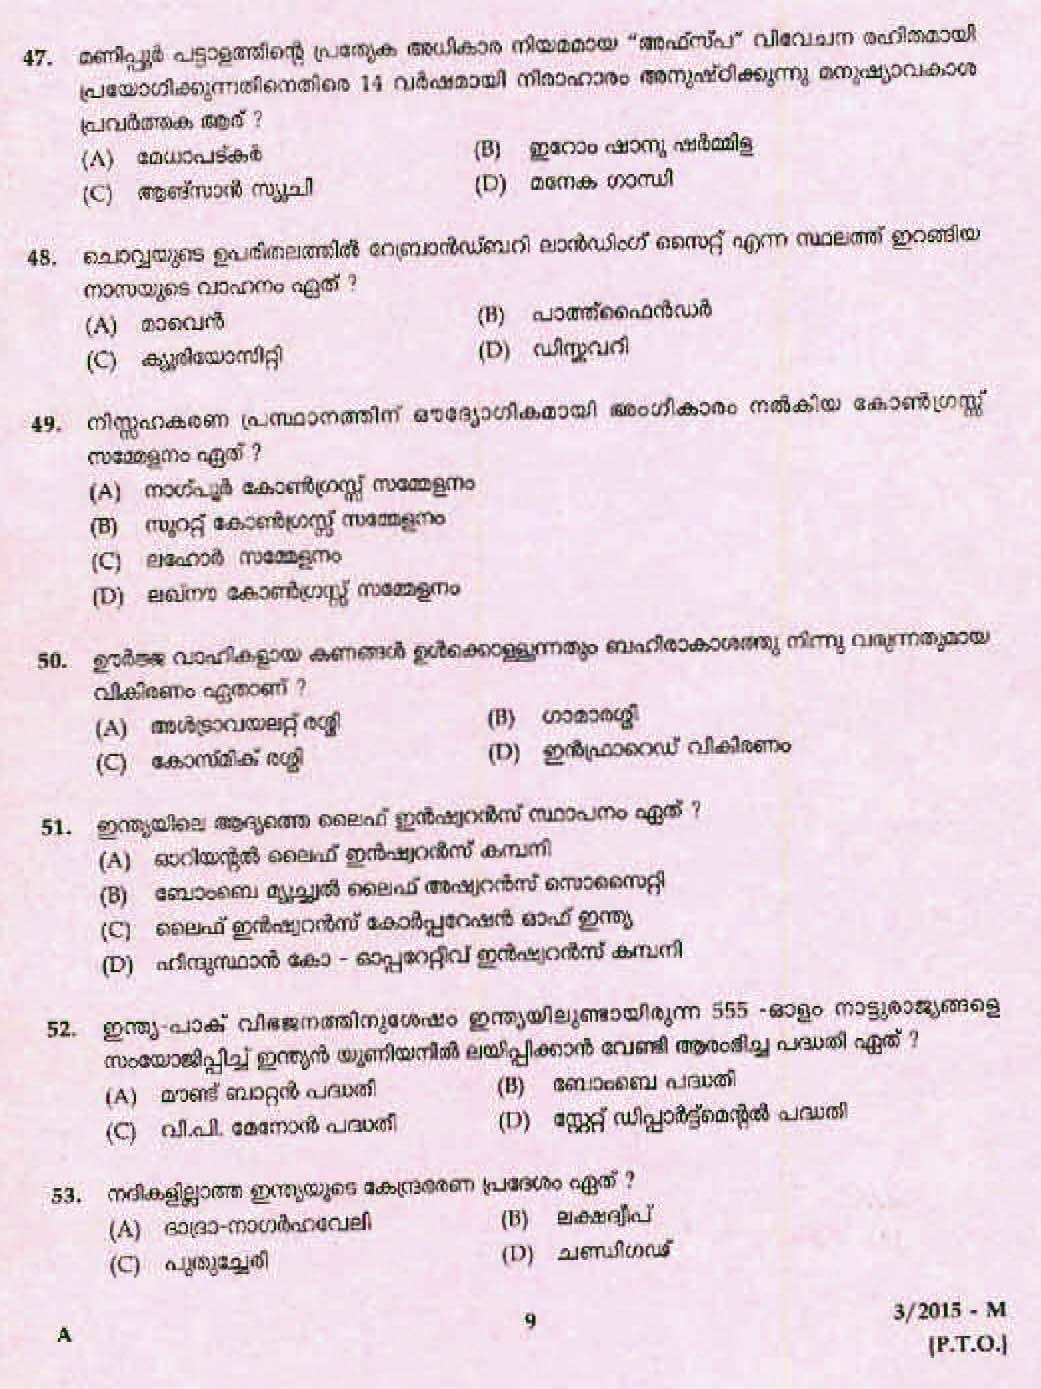 LD Clerk Thrissur District Question Paper Malayalam 2015 Paper Code 32015 M 7